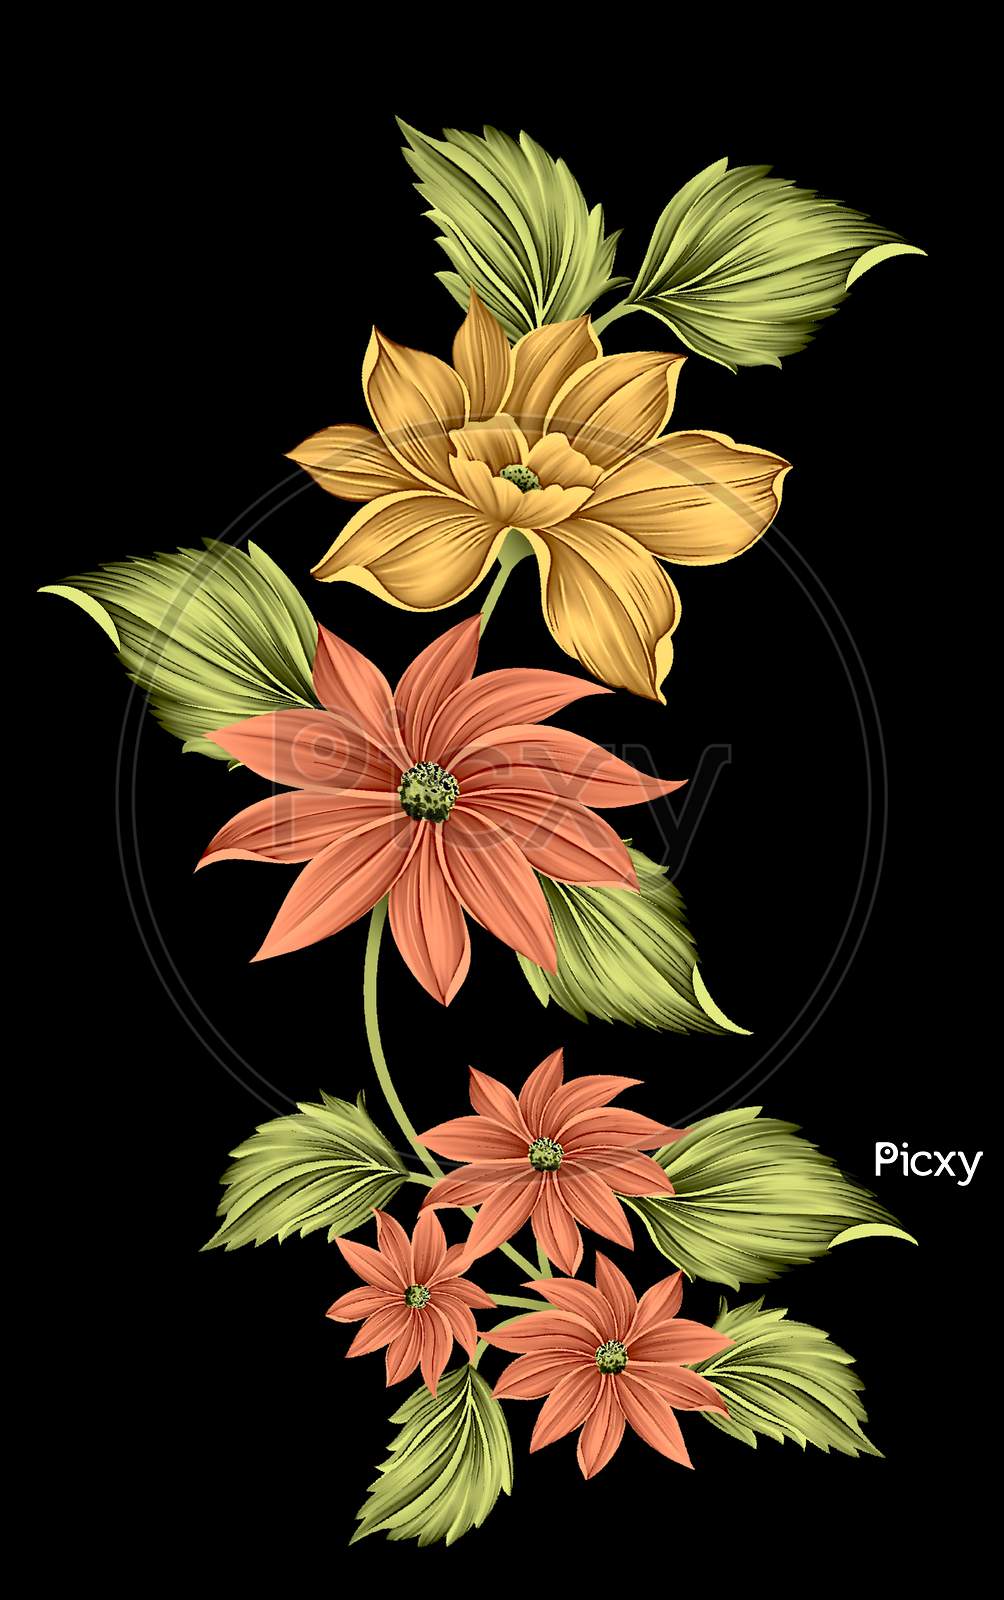 Digital Textile Design Flowers And Leaves With Black Color